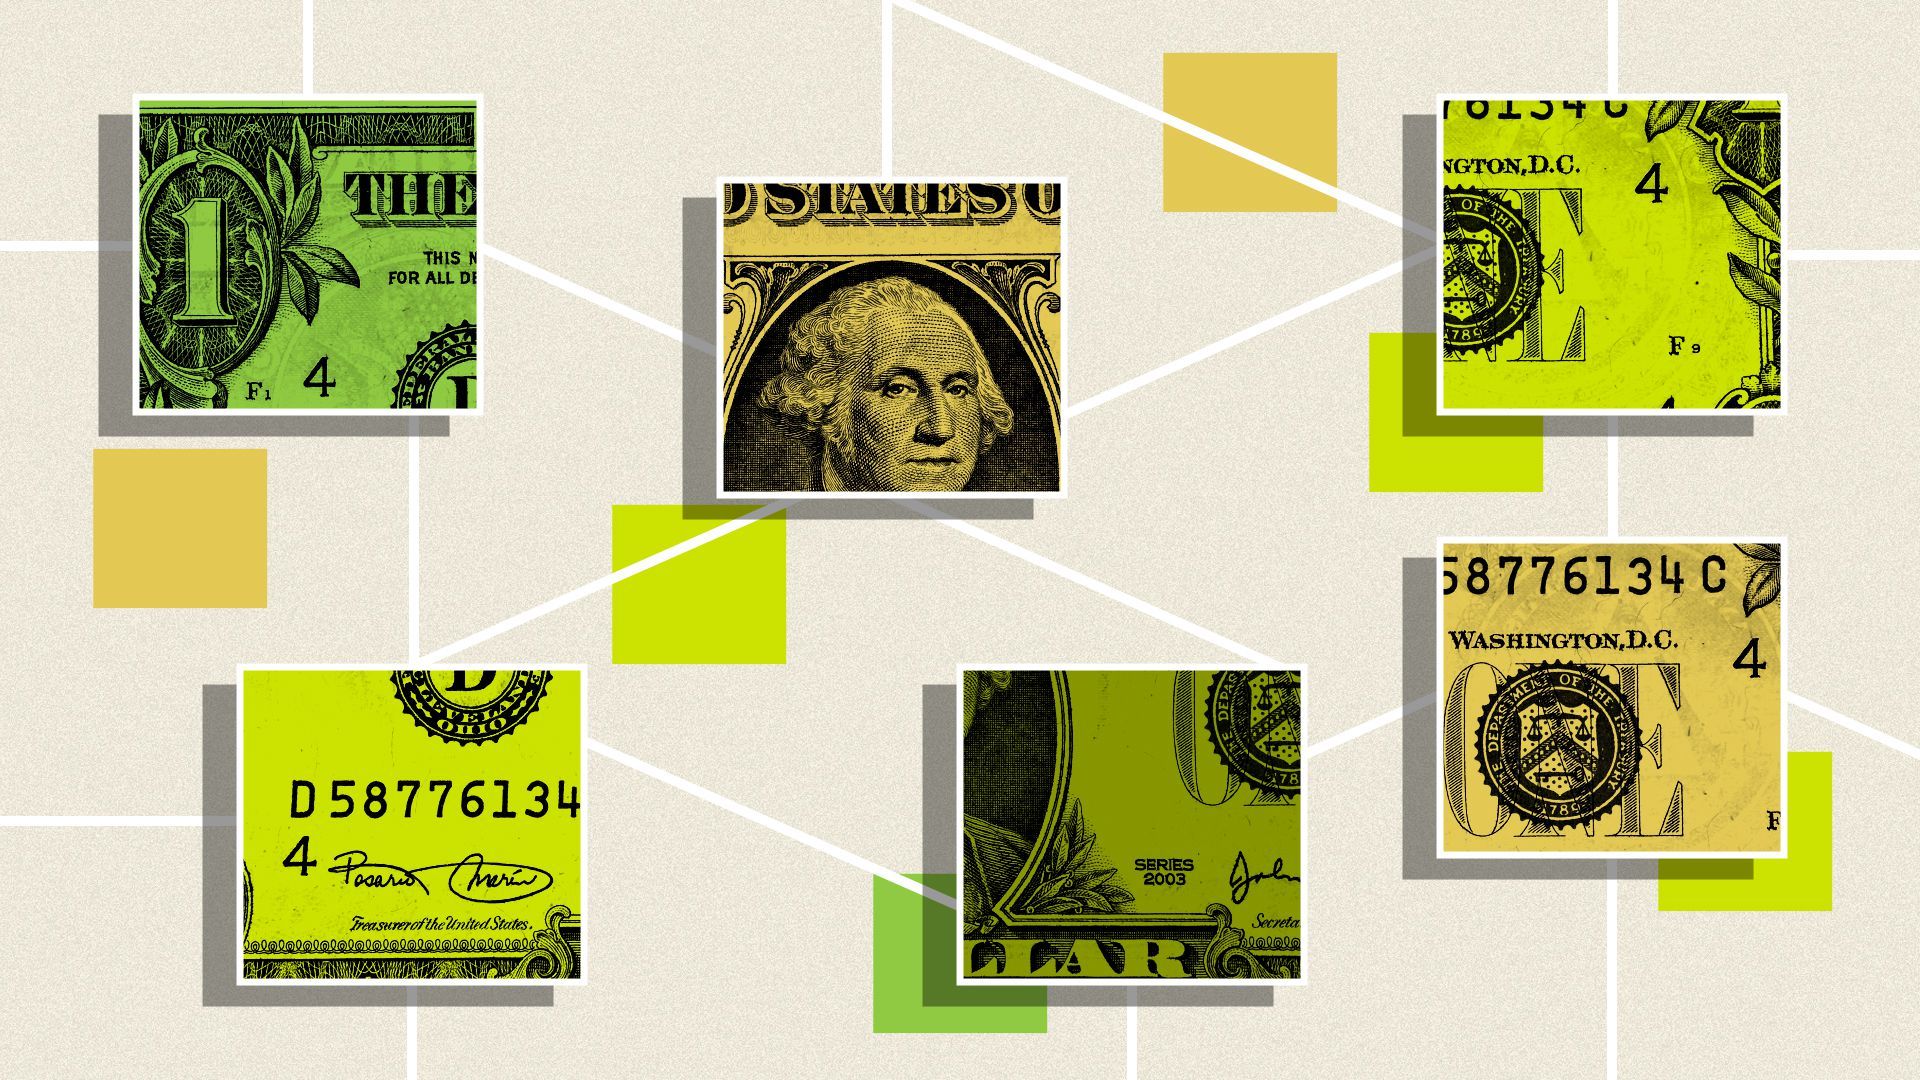 Illustration of a dollar bill broken up into various connected squares